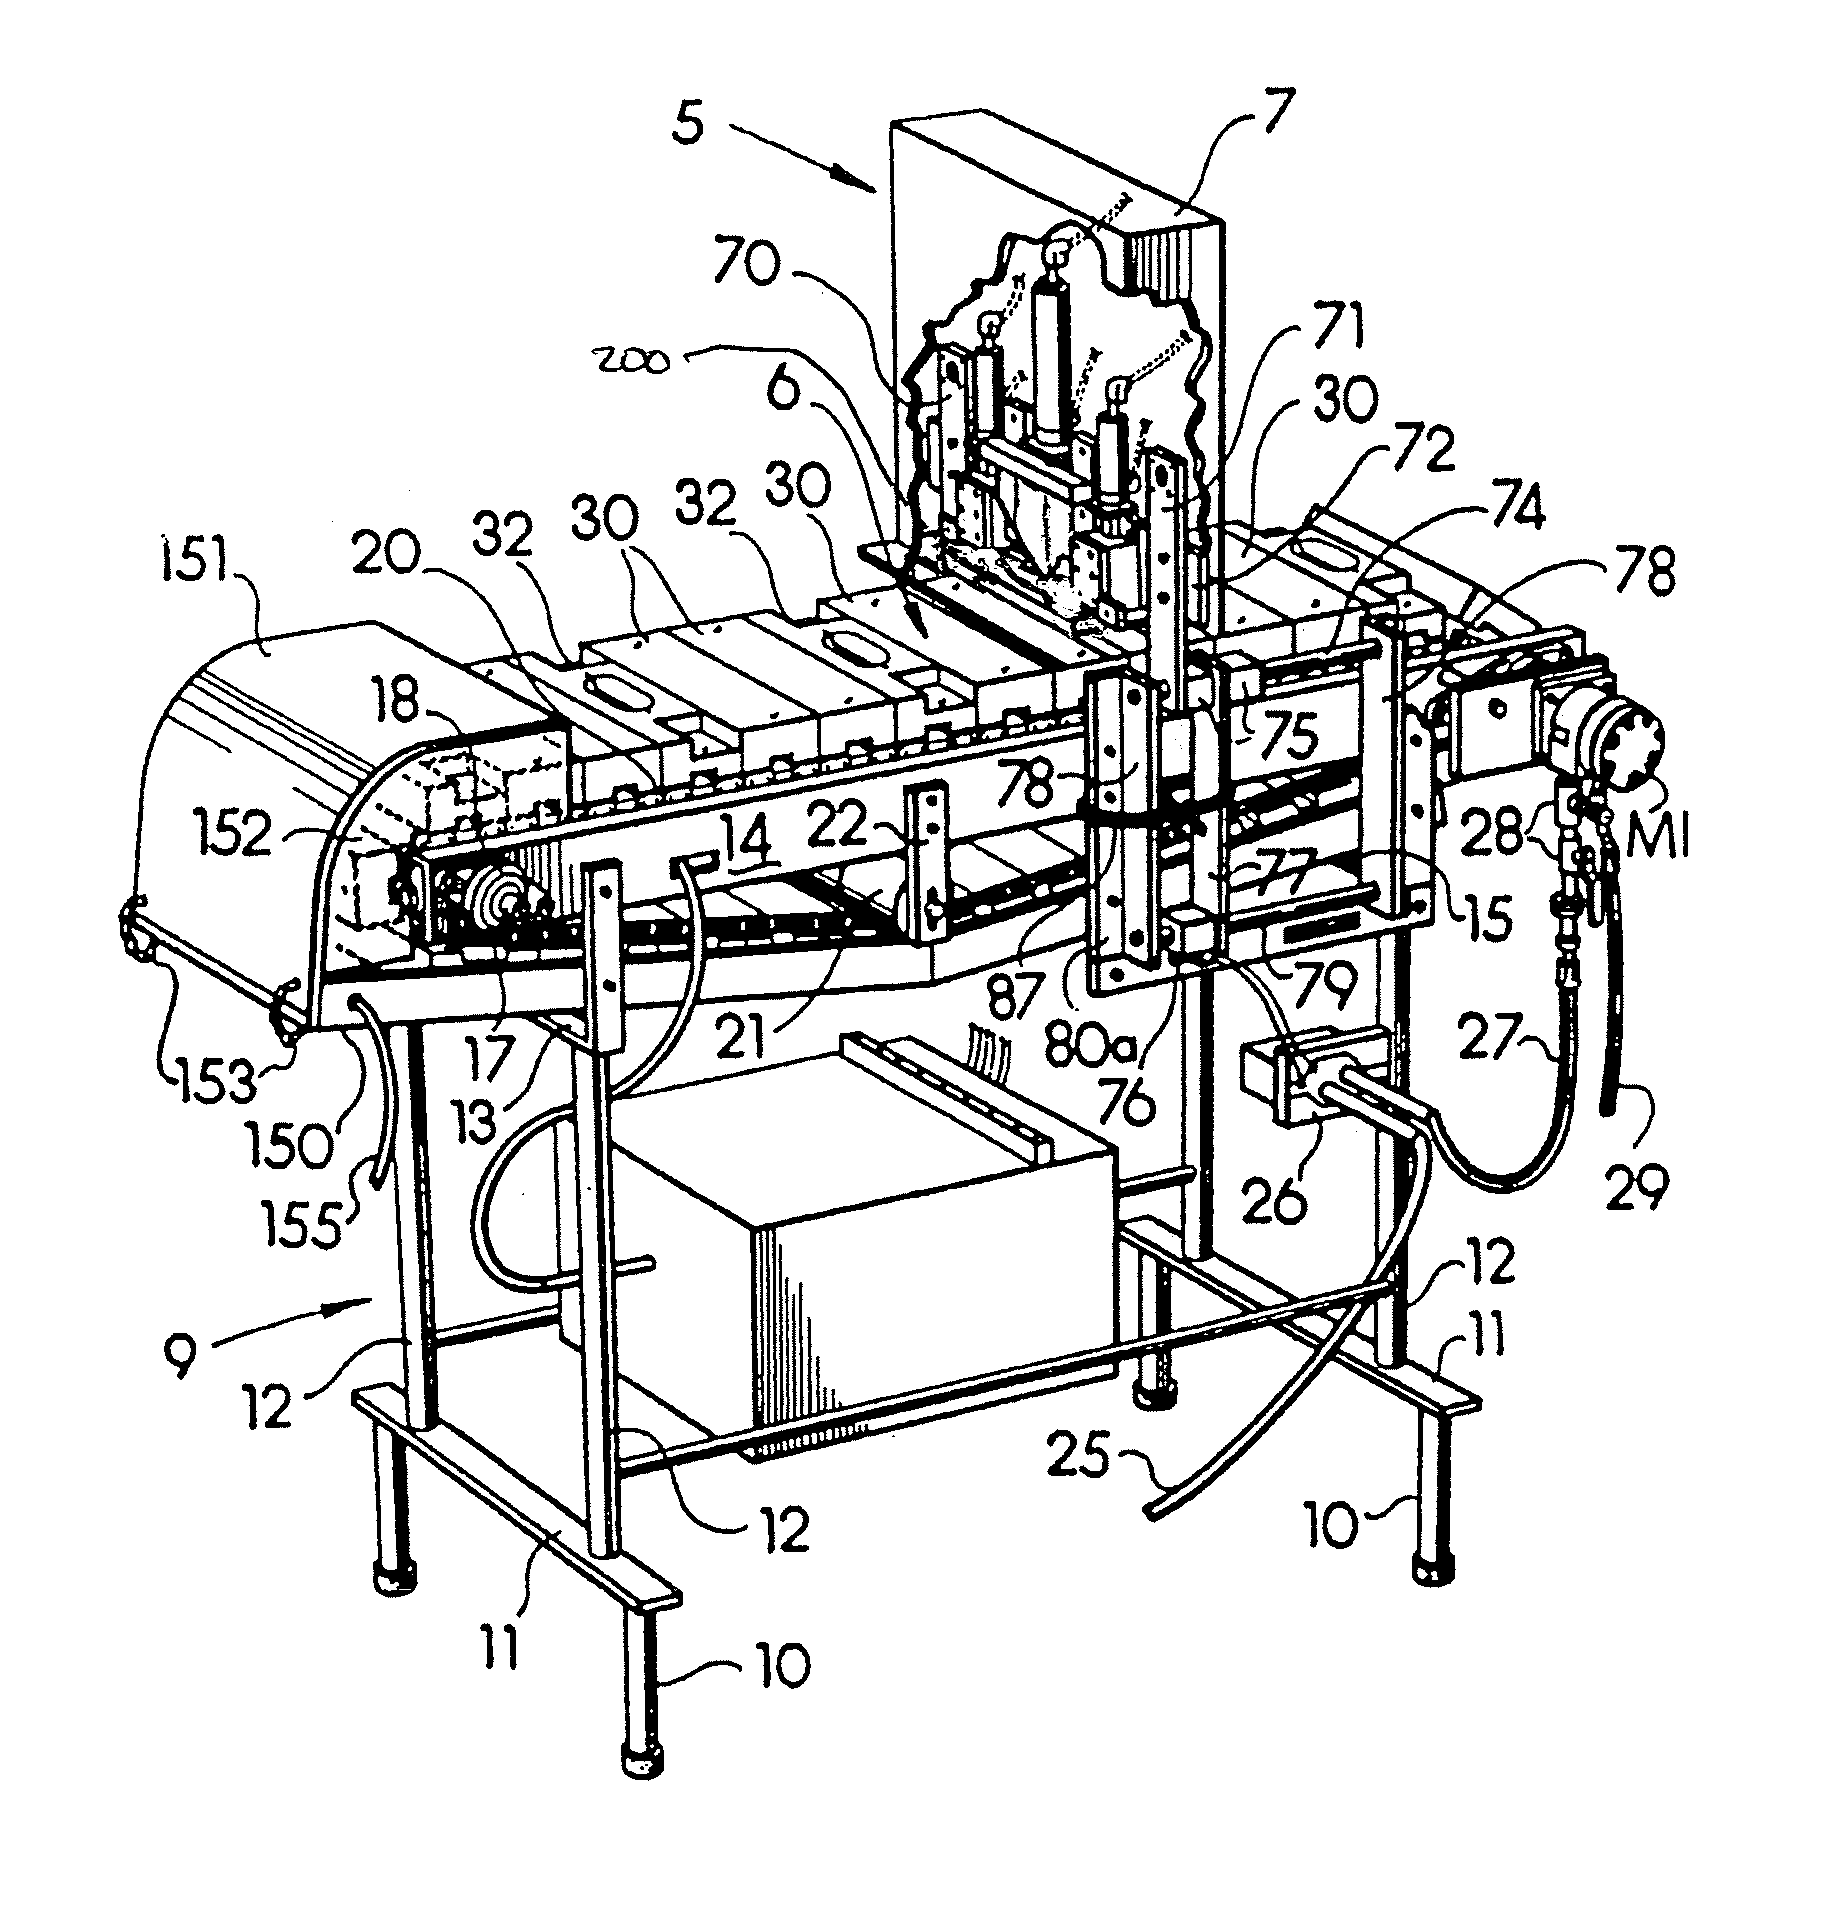 Method and apparatus for cutting the second joint of a poultry wing and product therefrom